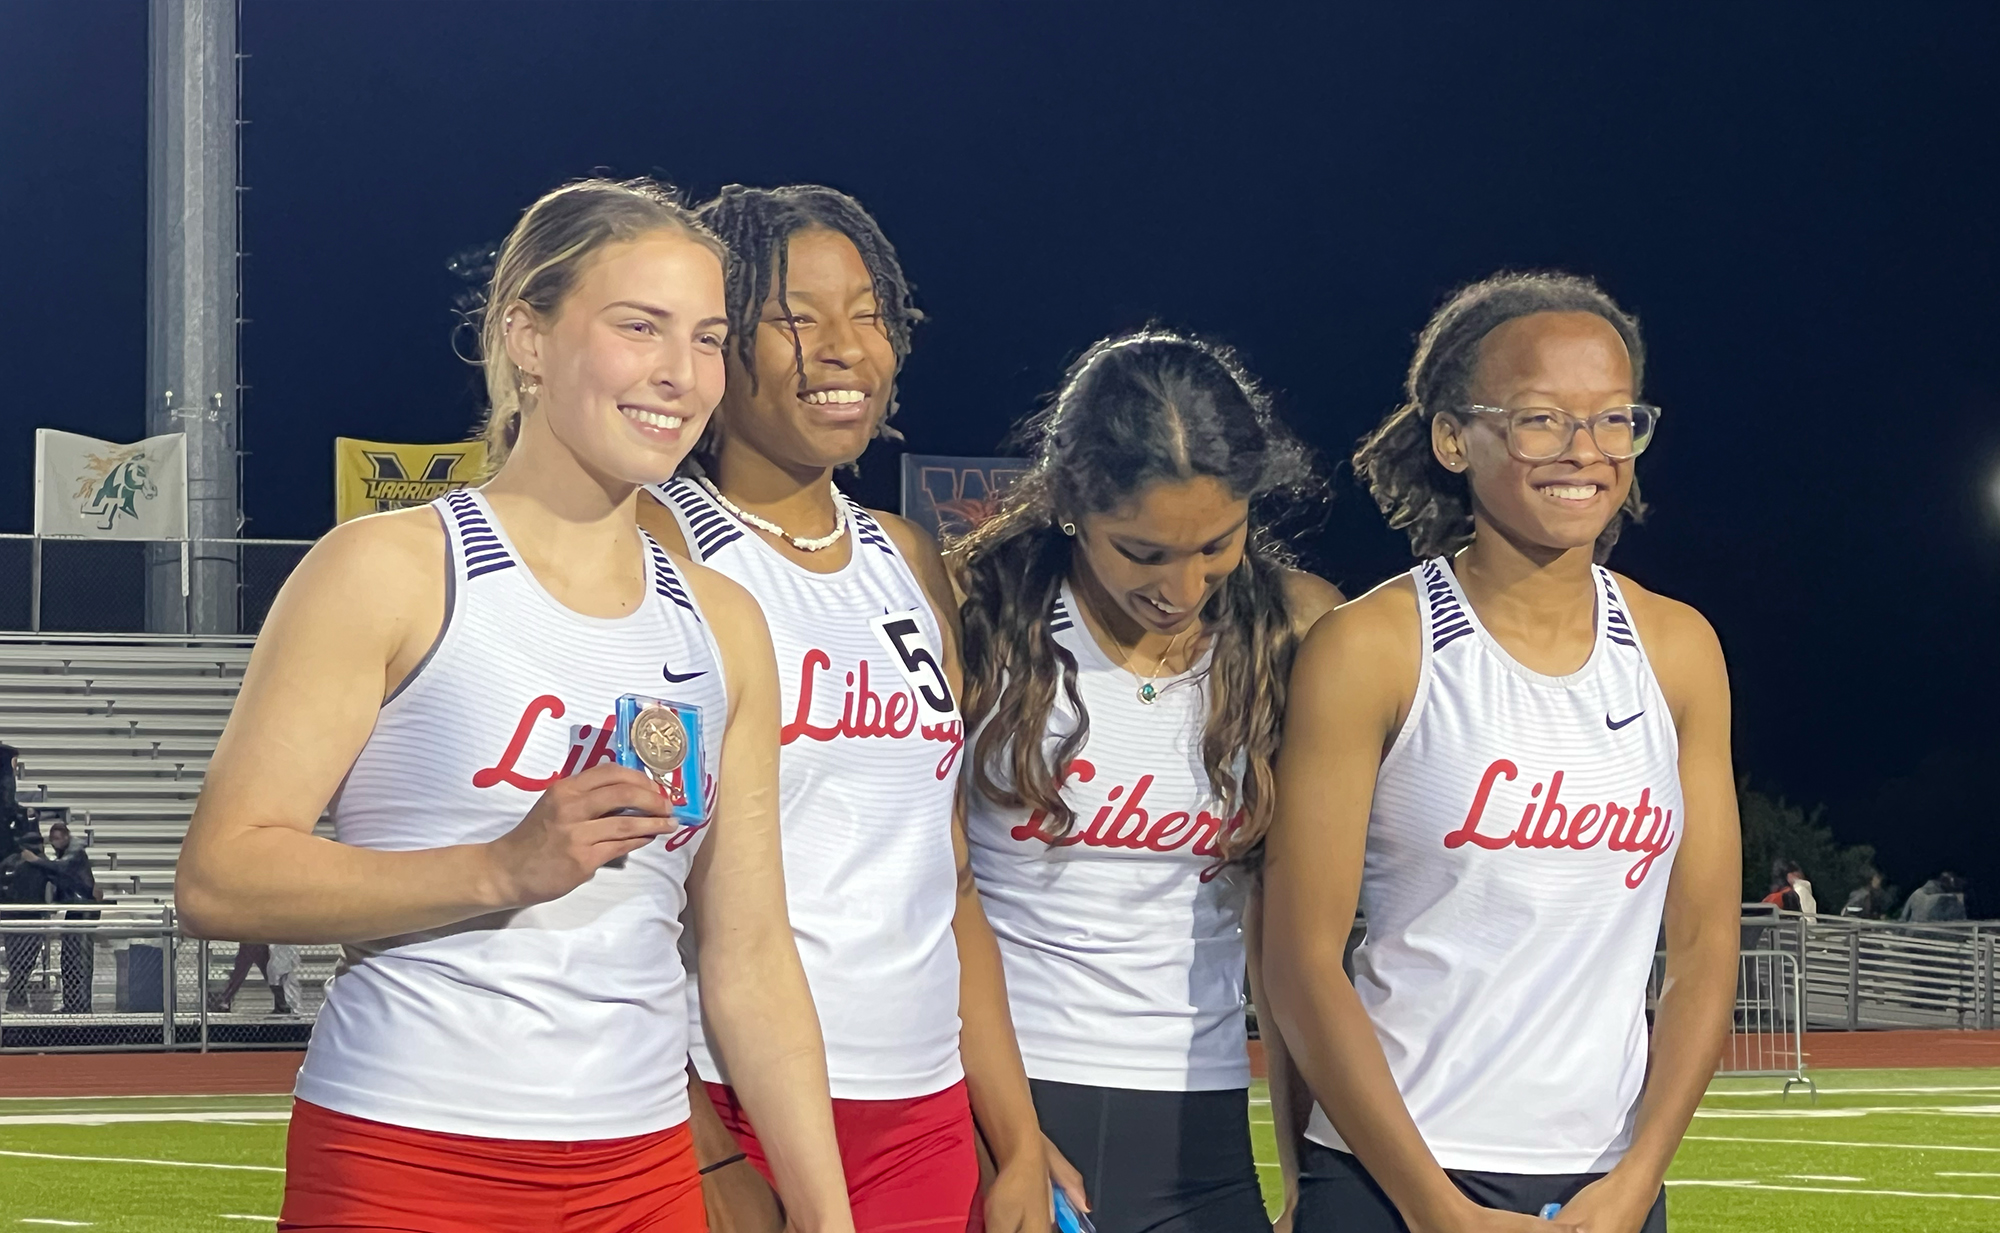 Race+continues+for+Redhawks+track+and+field